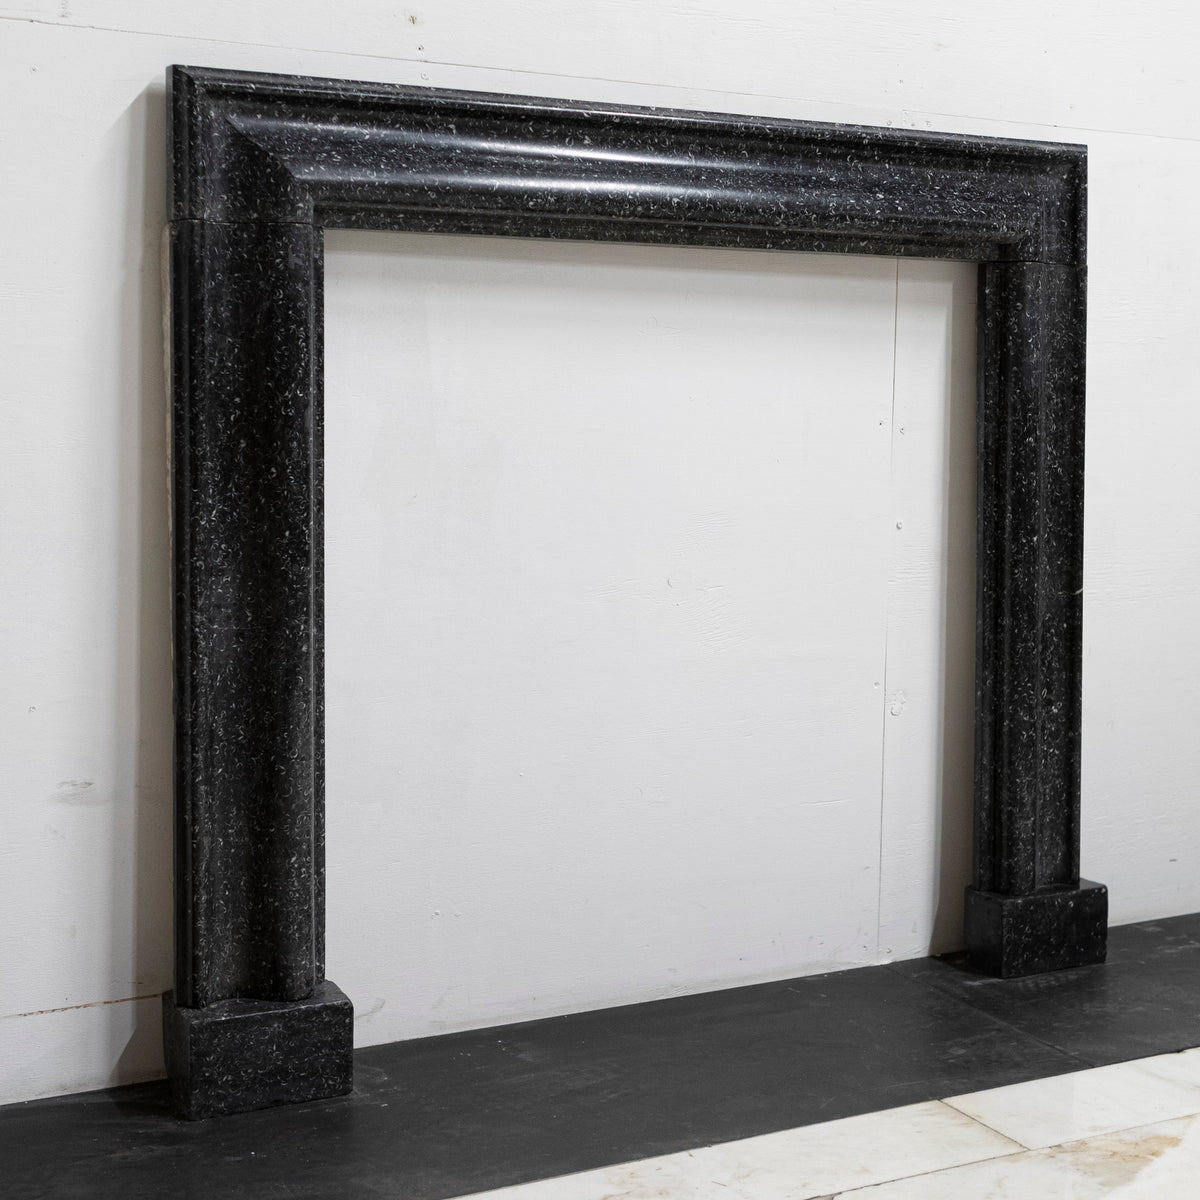 Splendid Antique 18th Century Kilkenny Marble Bolection Fireplace Surround | The Architectural Forum